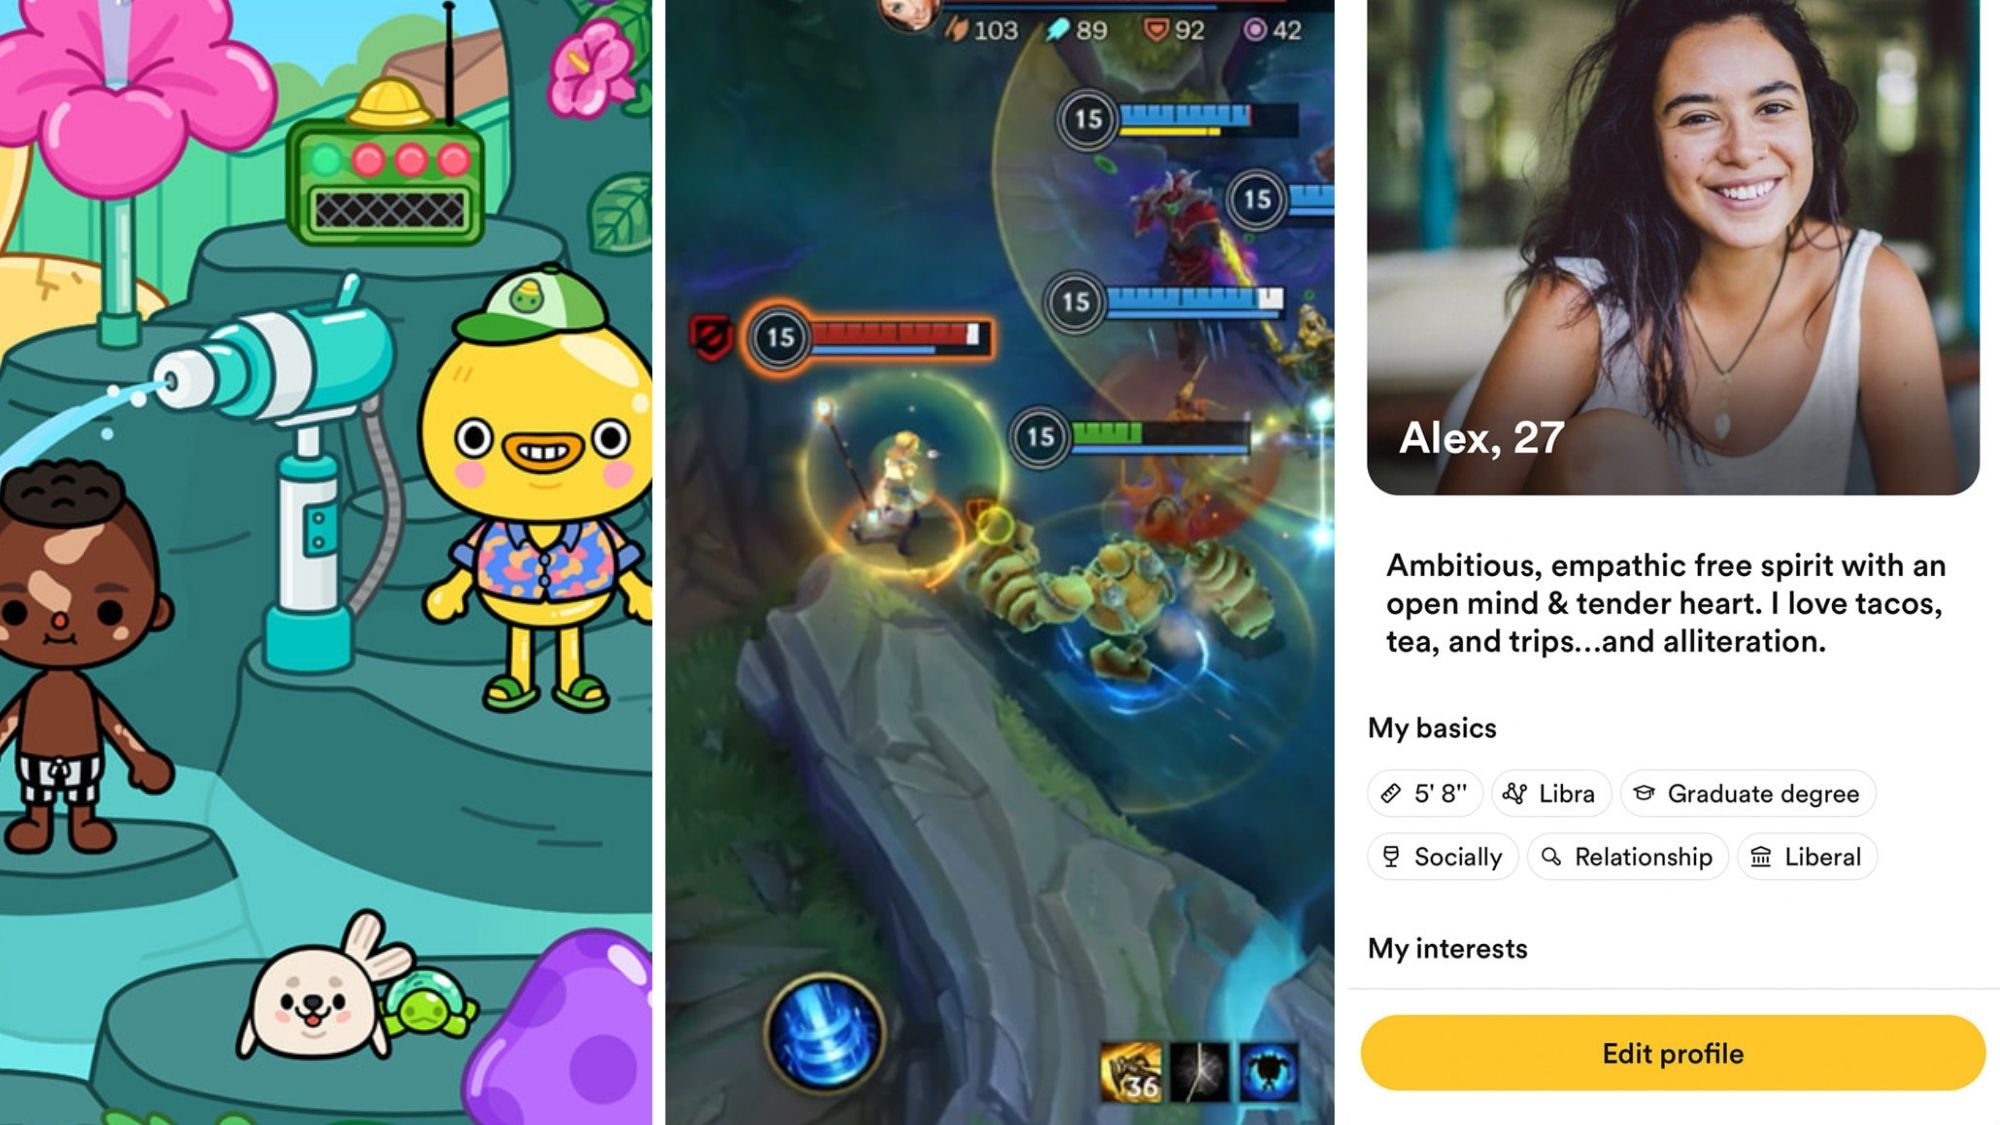 Apple best apps in 2021: Toca Life is iPhone app of the year